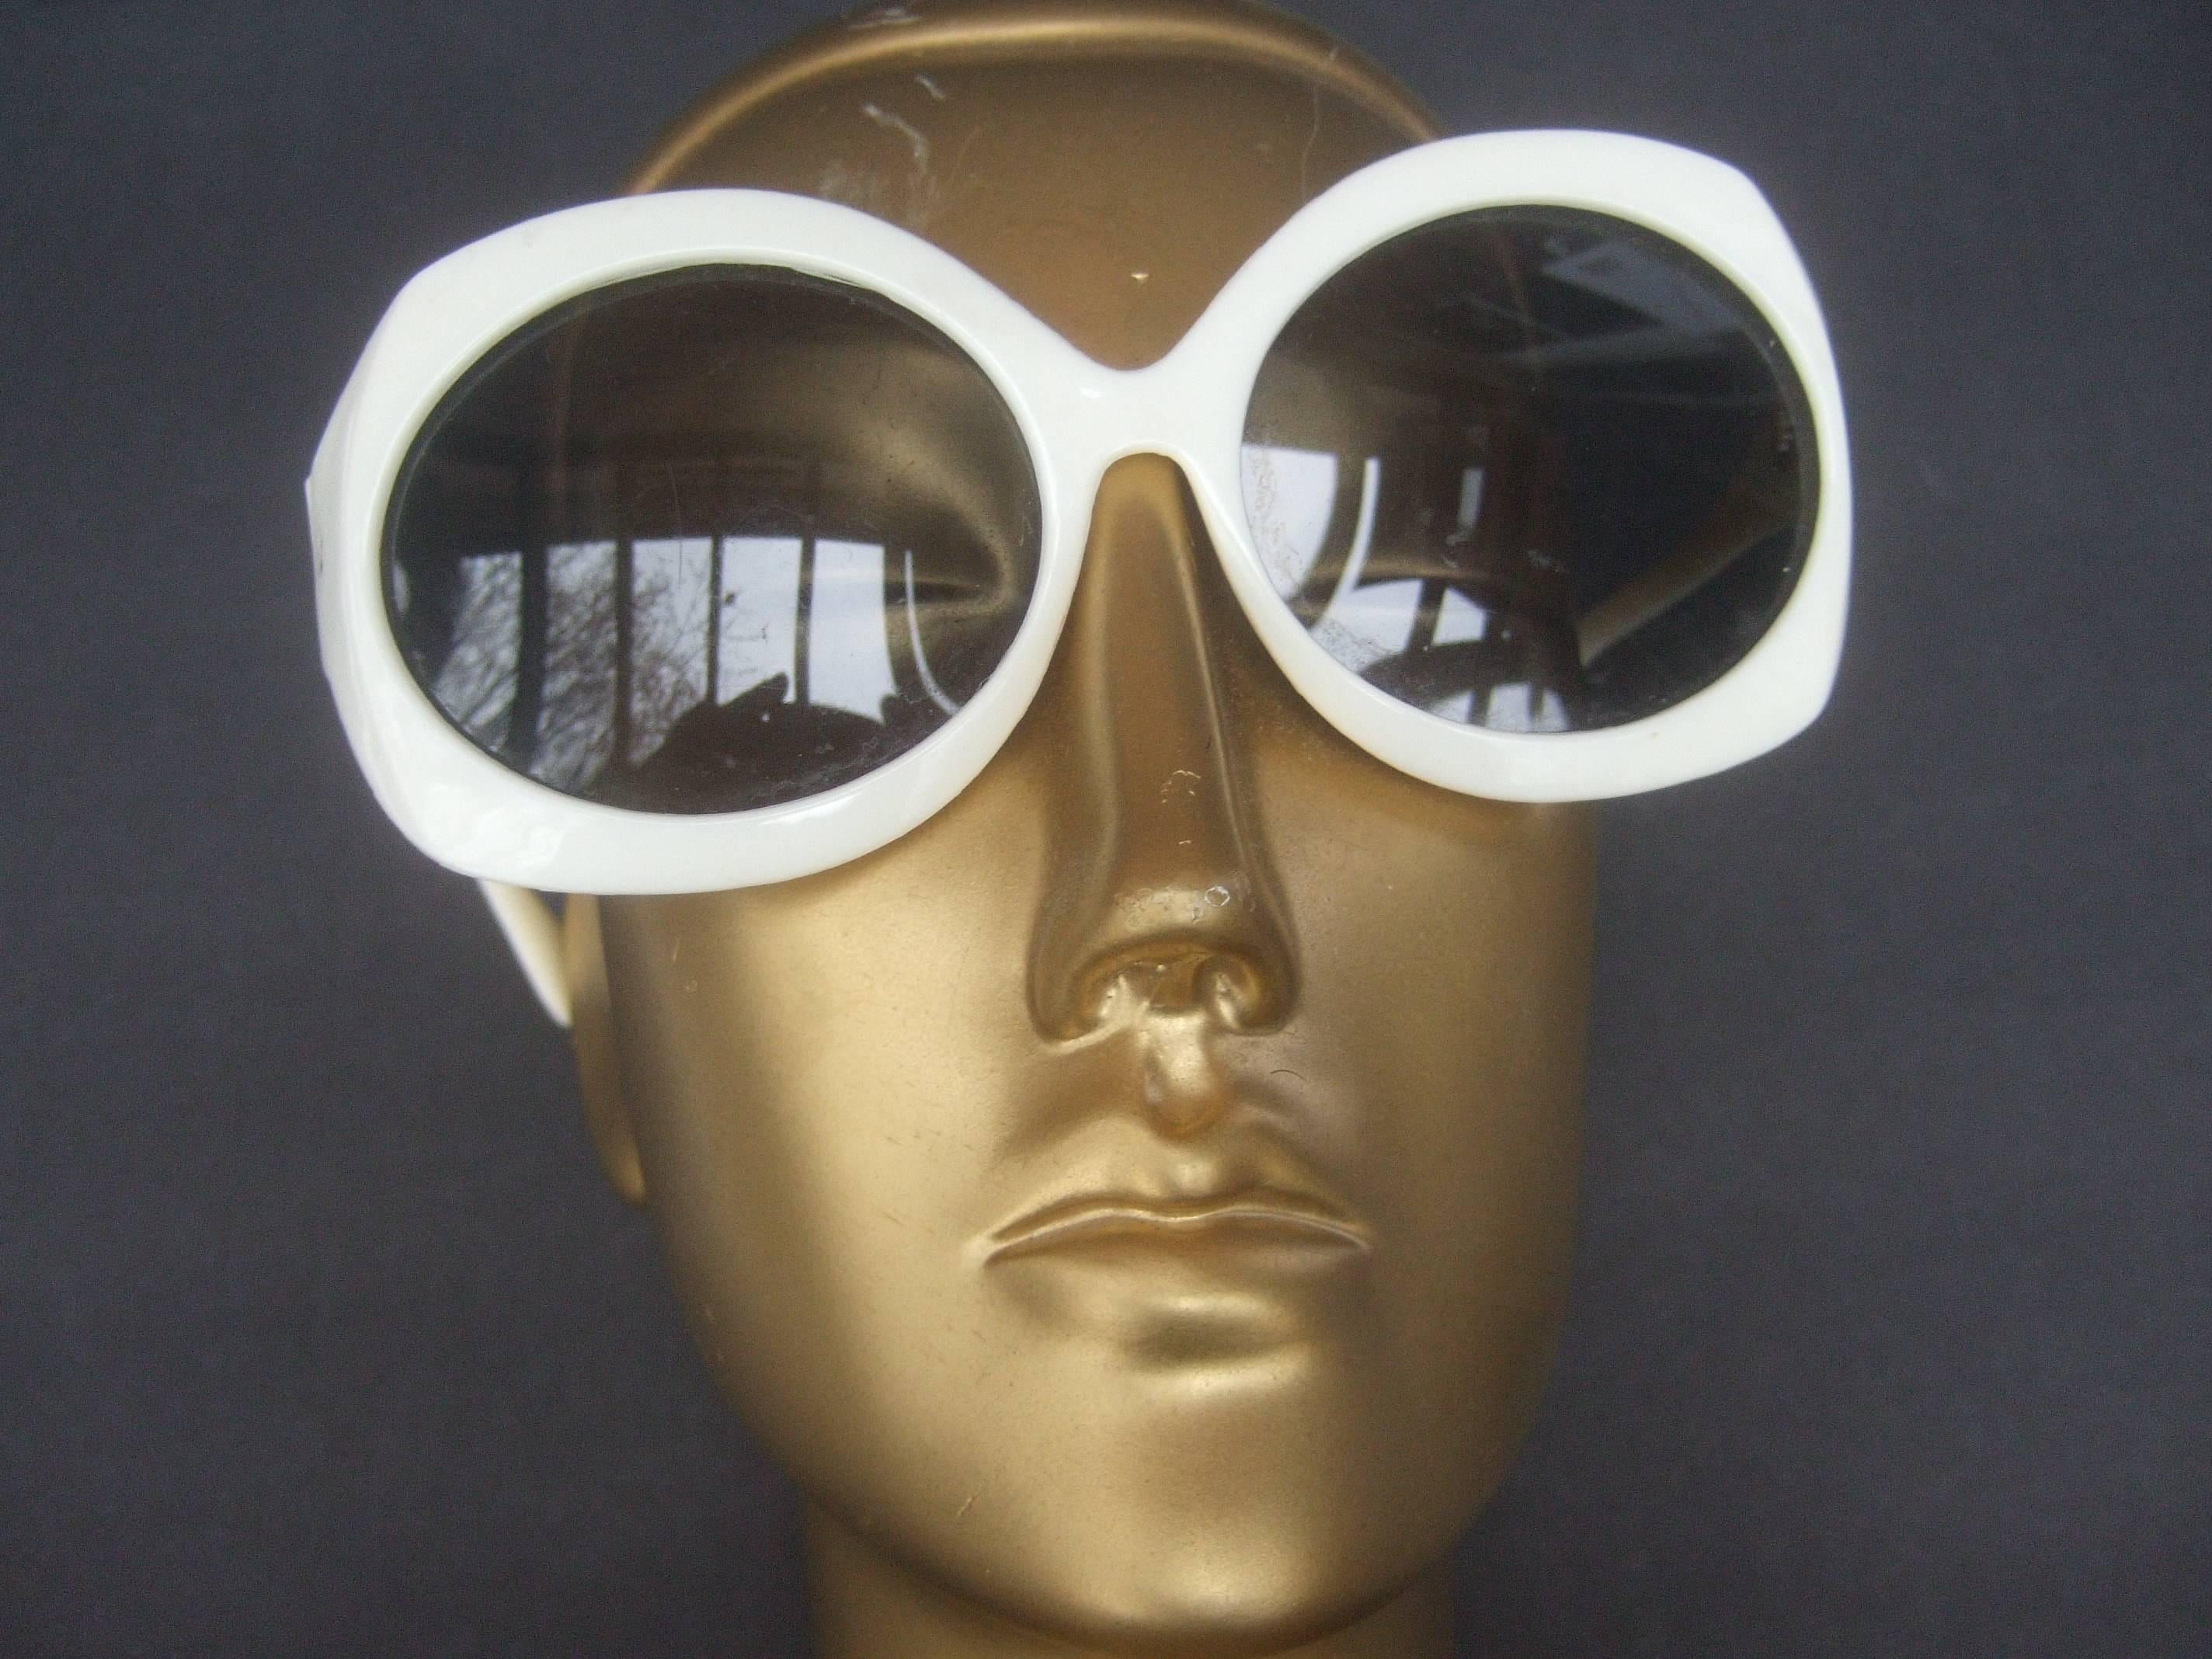 Mod Italian sleek white plastic sunglasses ca 1970
The stylish retro sunglasses are designed with 
tinted gray plastic large scale lenses 

The bold frames are shiny white plastic 
Makes a very chic sporty summer or resort
wear accessory

Designed